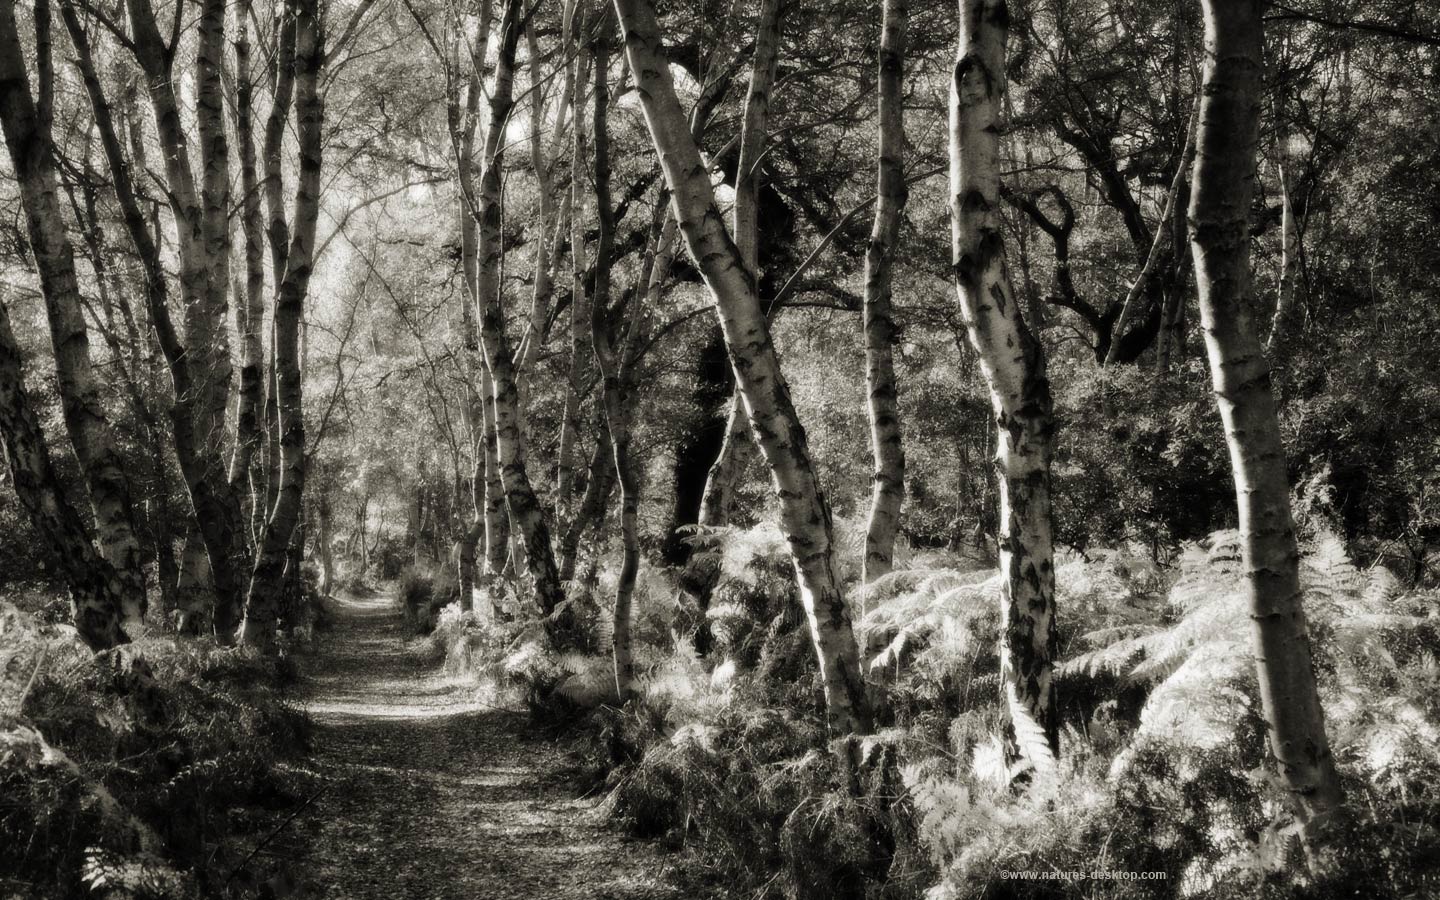 Black And White Desktop Wallpaper Picture Of A Woodland Path Lined